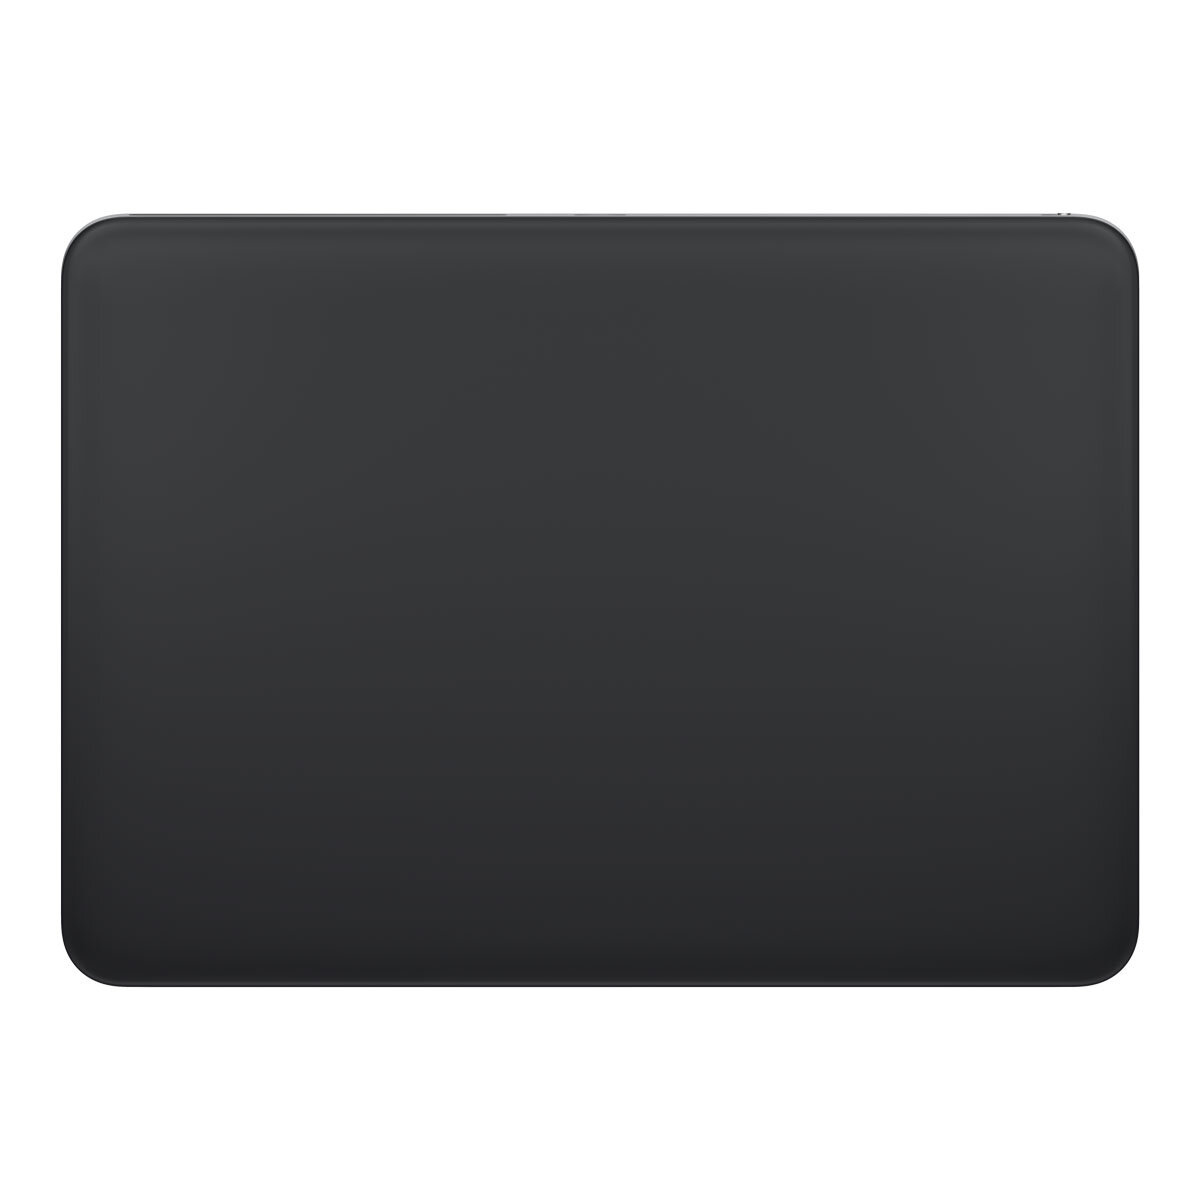 Buy Apple Magic Trackpad - Black Multi-Touch Surface, MMMP3Z/A at costco.co.uk